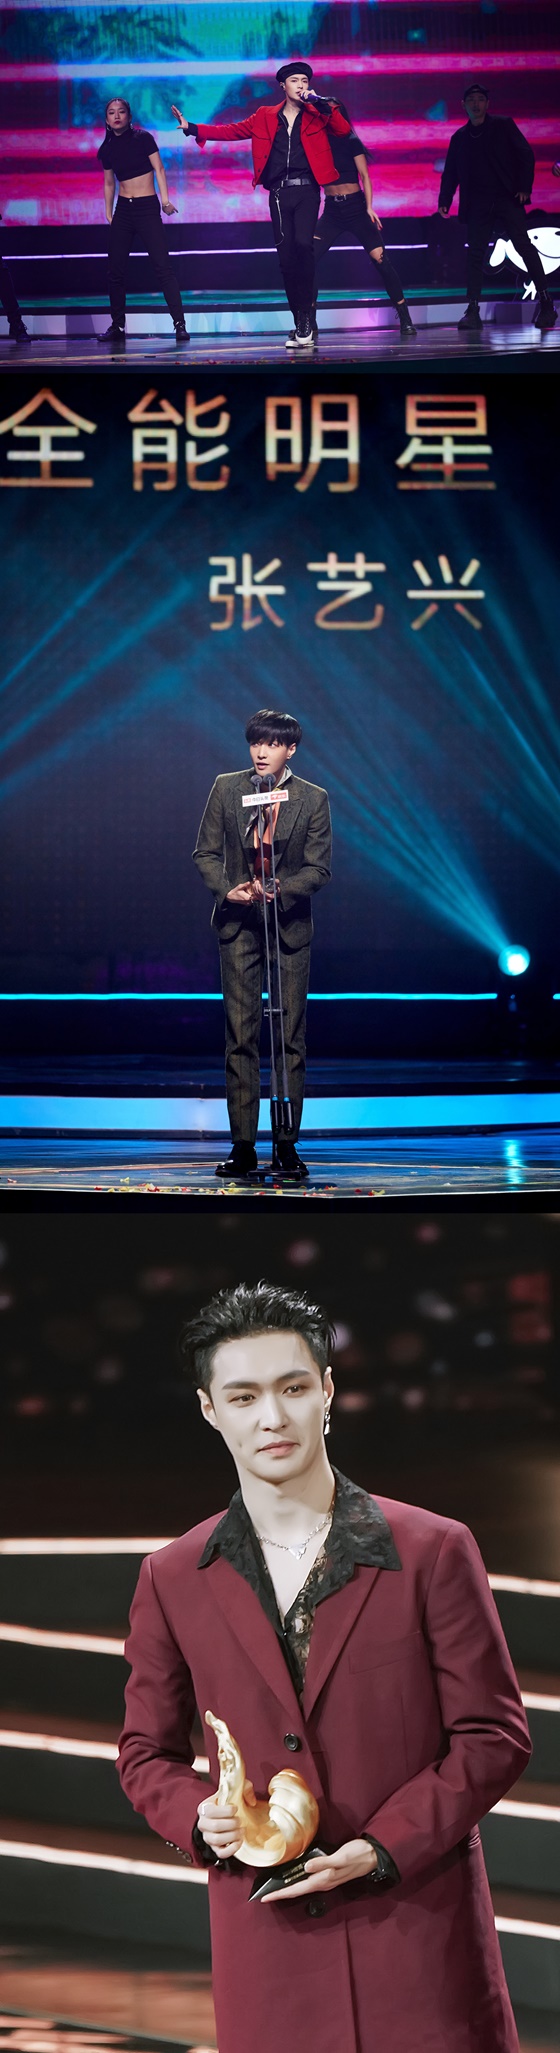 EXO member Lay also swept the China awards ceremony in the new year.Lay attended the 2019 Weibo Night (2019) held at the Beijing Water Cube on the 11th (local time) and won the Best Producer of the Year award and the Nam Shin of the Year award.The 10th annual 2019 Weibo Night is an awards ceremony hosted by Chinas largest SNS Weibo, inviting Weibo to a hot star for a year.Lay has been recognized for his outstanding production skills, visuals, popularity, and topicality through various activities in 2019.Lay also won the All-Star of the Year award at the 2019 Byte Dance Years Festival (2019) at the Beijing Cadillac Arena on the 8th (local time), and the ending stage was spectacularly decorated with the hit song NAMANANA (Namana).The awards ceremony was hosted by ByteDance, which is serving video-sharing application TikTok, and News Application Jinrtouo, and was awarded with a selection of outstanding people and contents that are outstanding in popular culture based on big data in the byte dance platform.As a result, Lay was held in December last year 2019 Tencent Music Entertainment Awards three-time king, 2020 Aichi Night of the Shout, followed by 2019 Weibo Night and 2019 Byte Dance Year, followed by a total of 8 awards at the China end of the year ceremony.